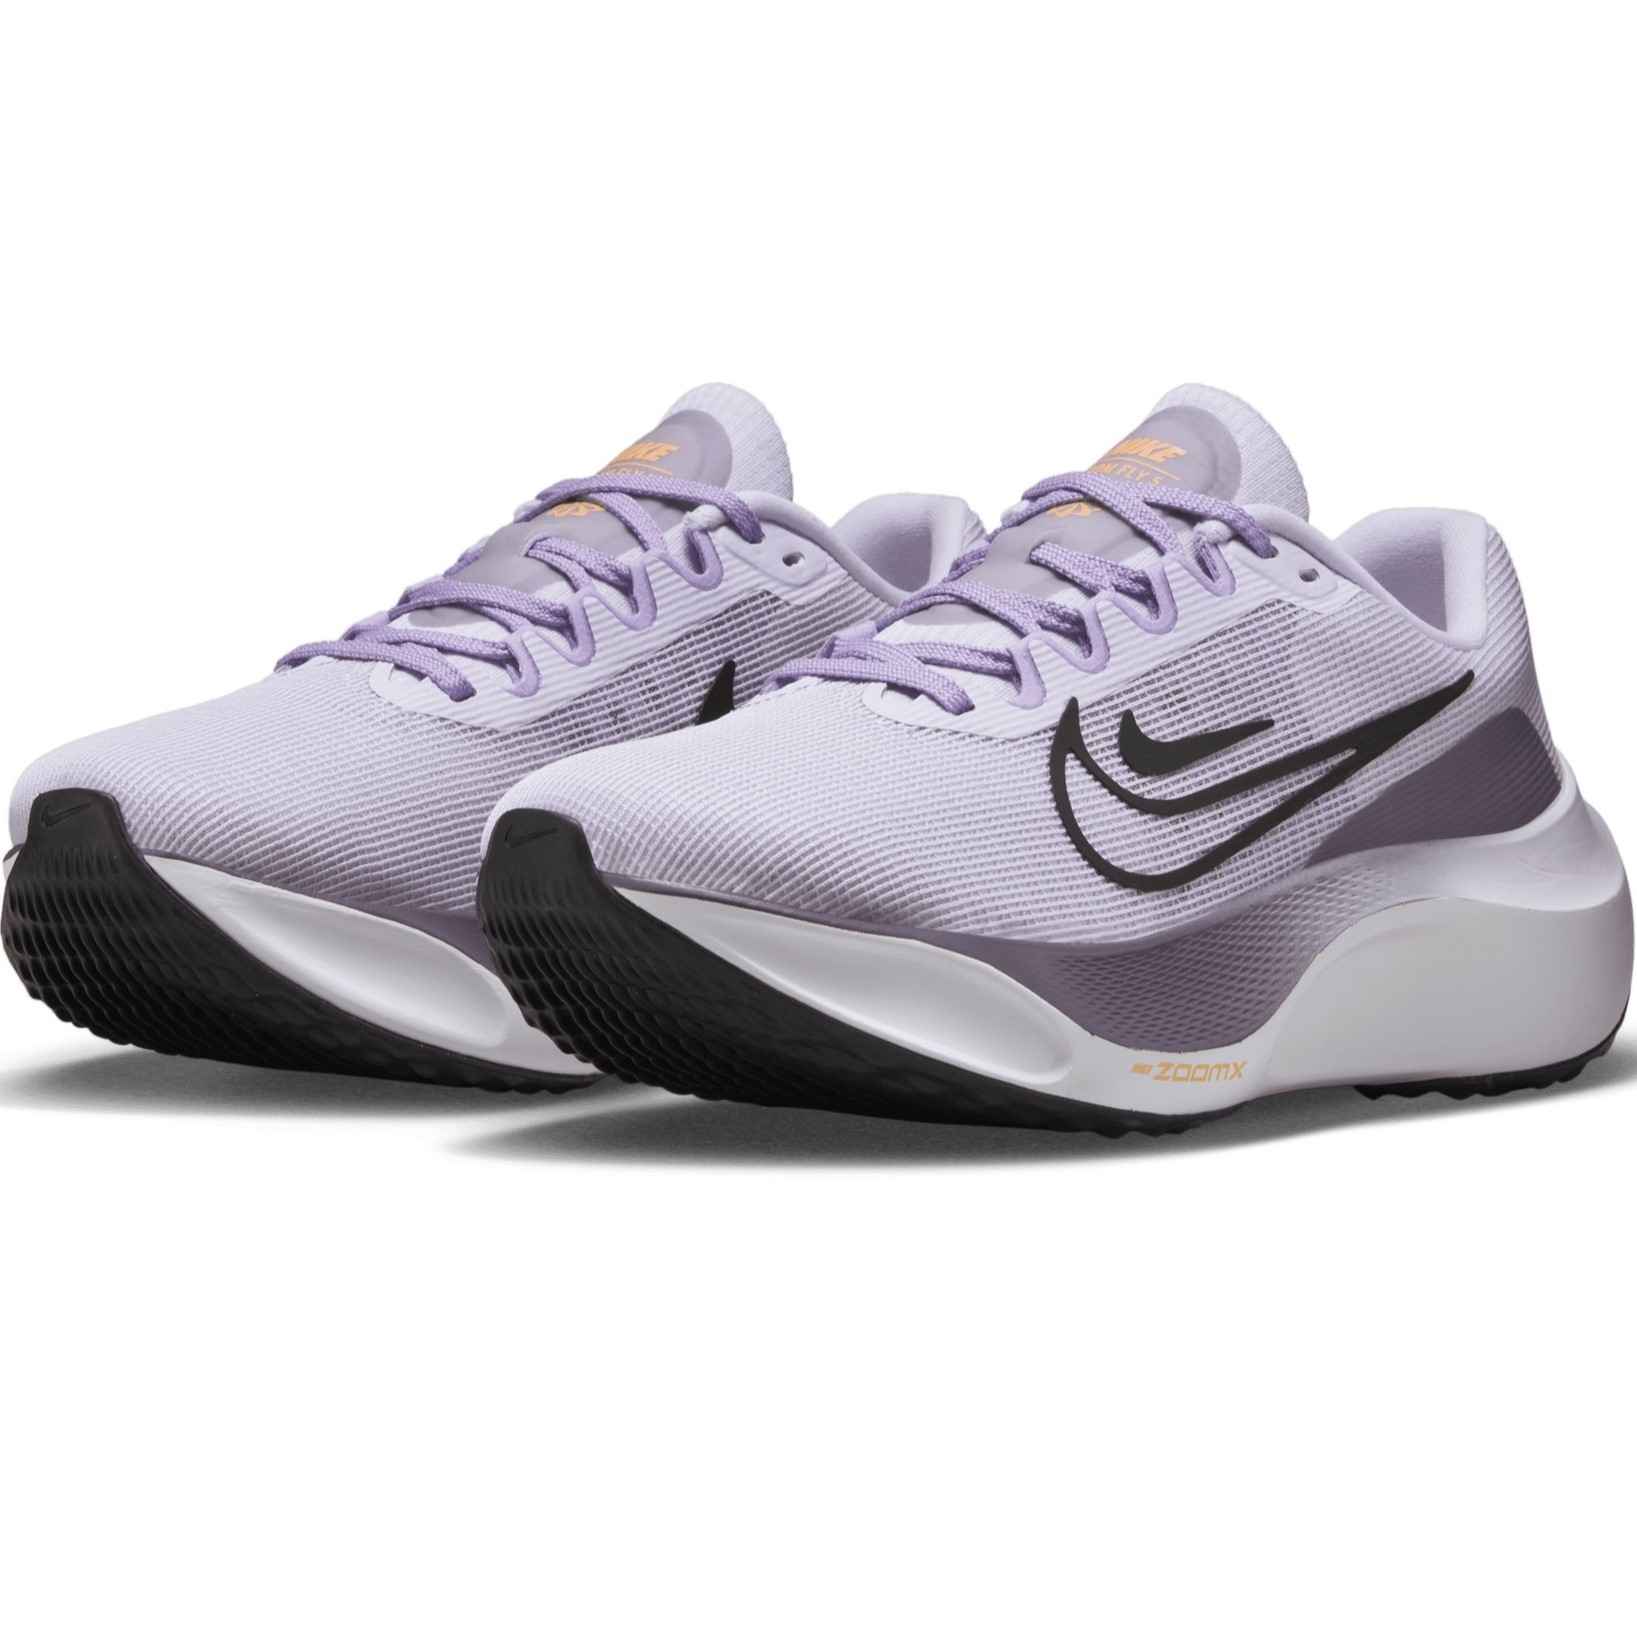 GIÀY NIKE NỮ ZOOM FLY 5 WOMEN ROAD RUNNING SHOES BARELY GRAPE DM8974-500 2